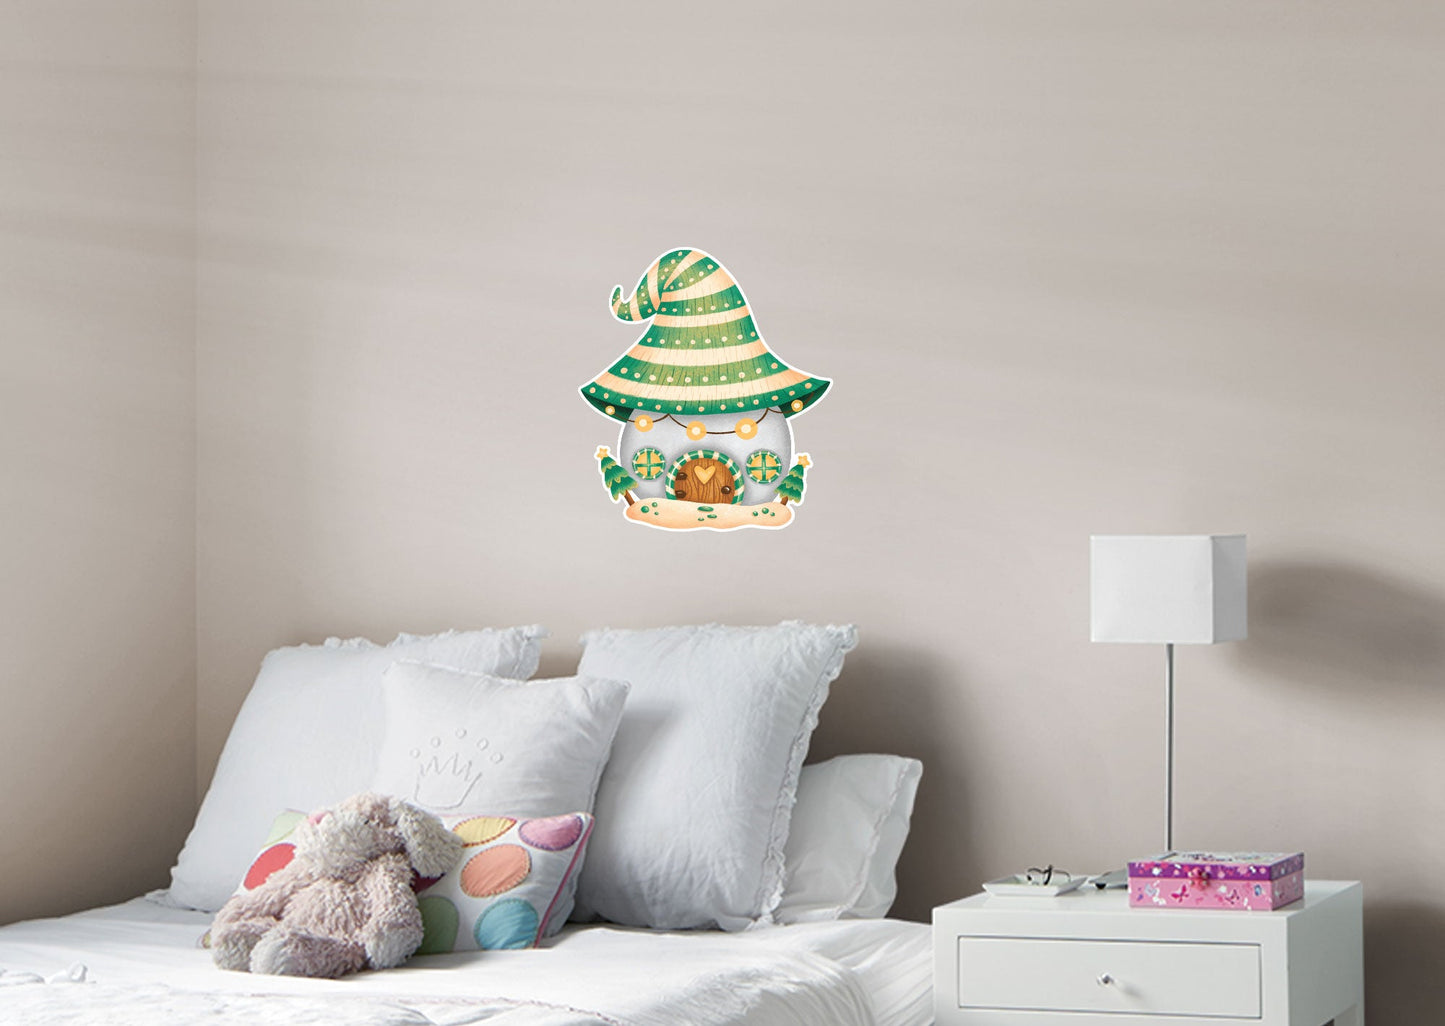 Nursery:  Enchanted House Icon        -   Removable     Adhesive Decal